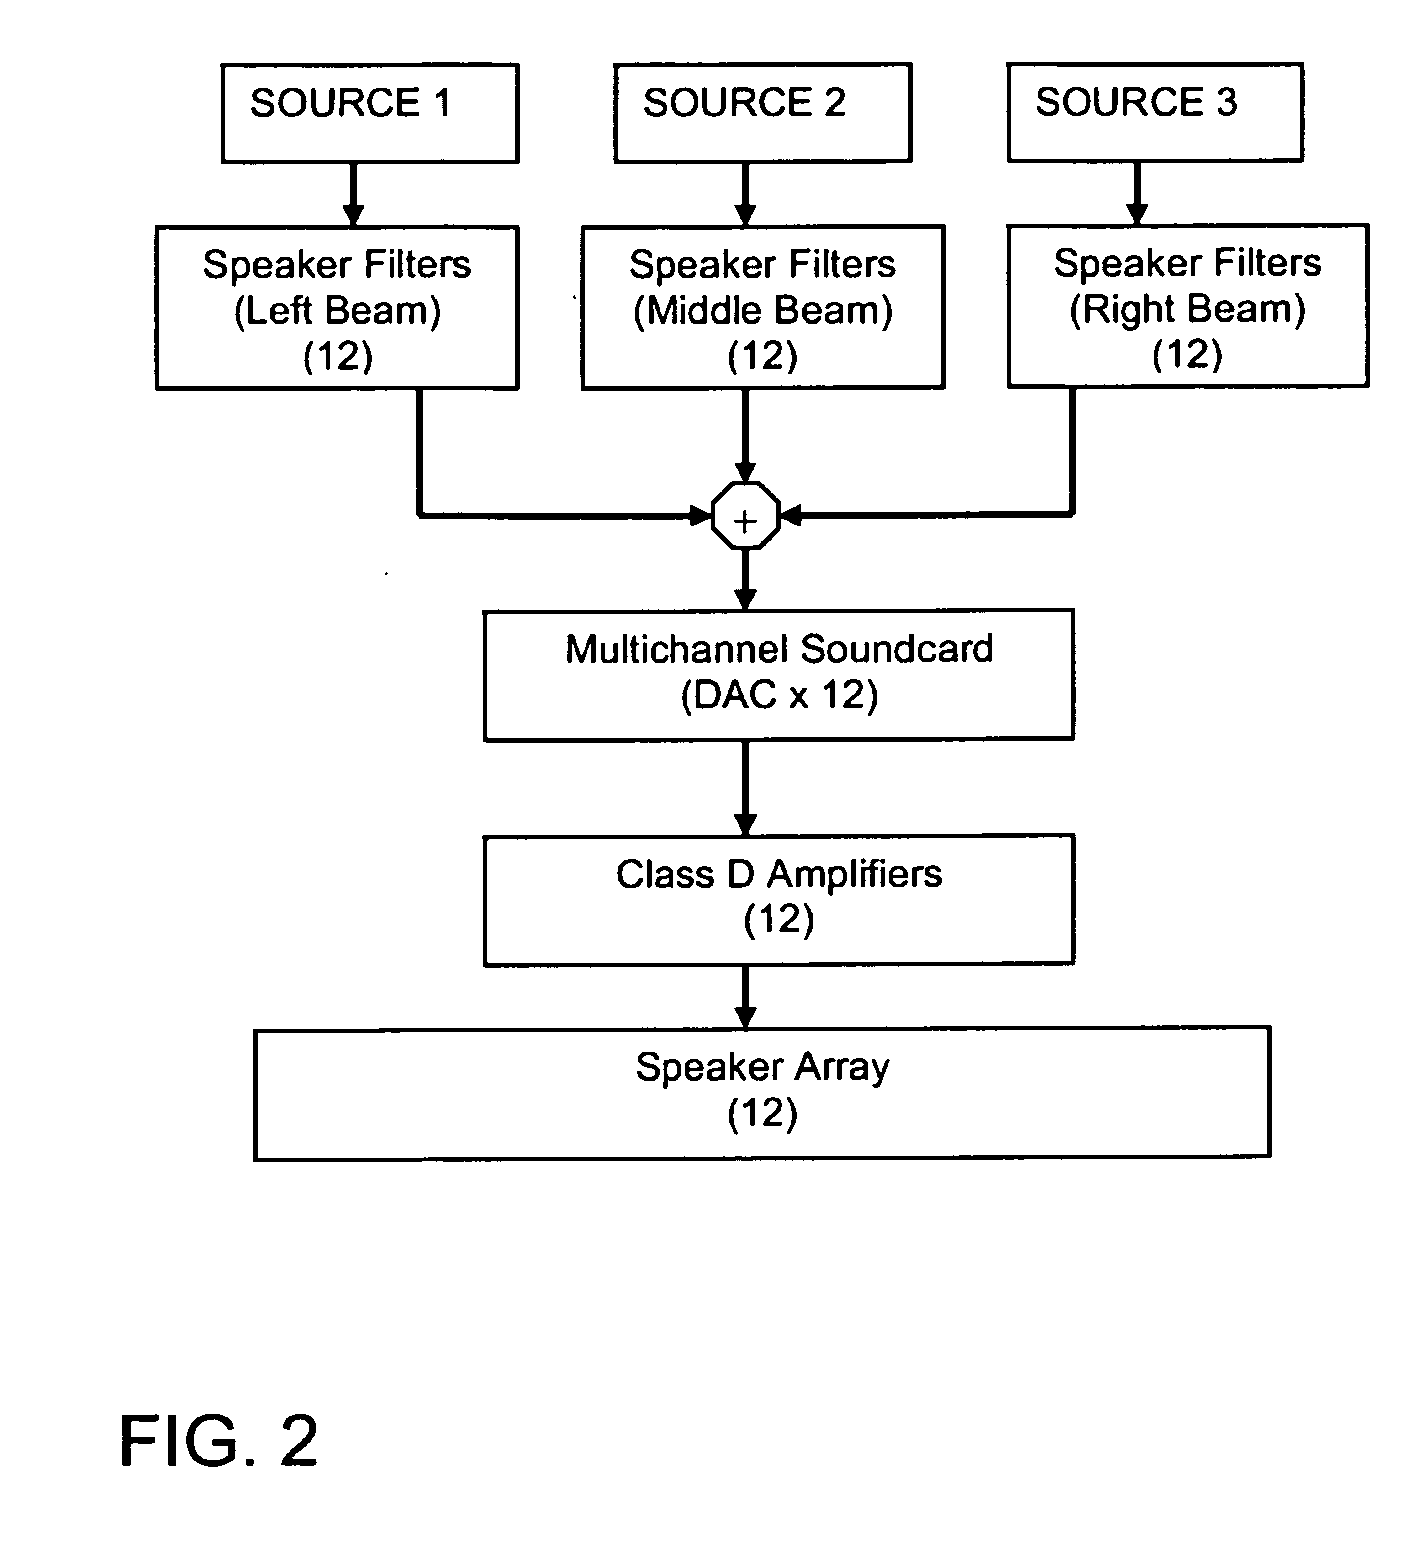 Method for controlling a speaker array to provide spatialized, localized, and binaural virtual surround sound